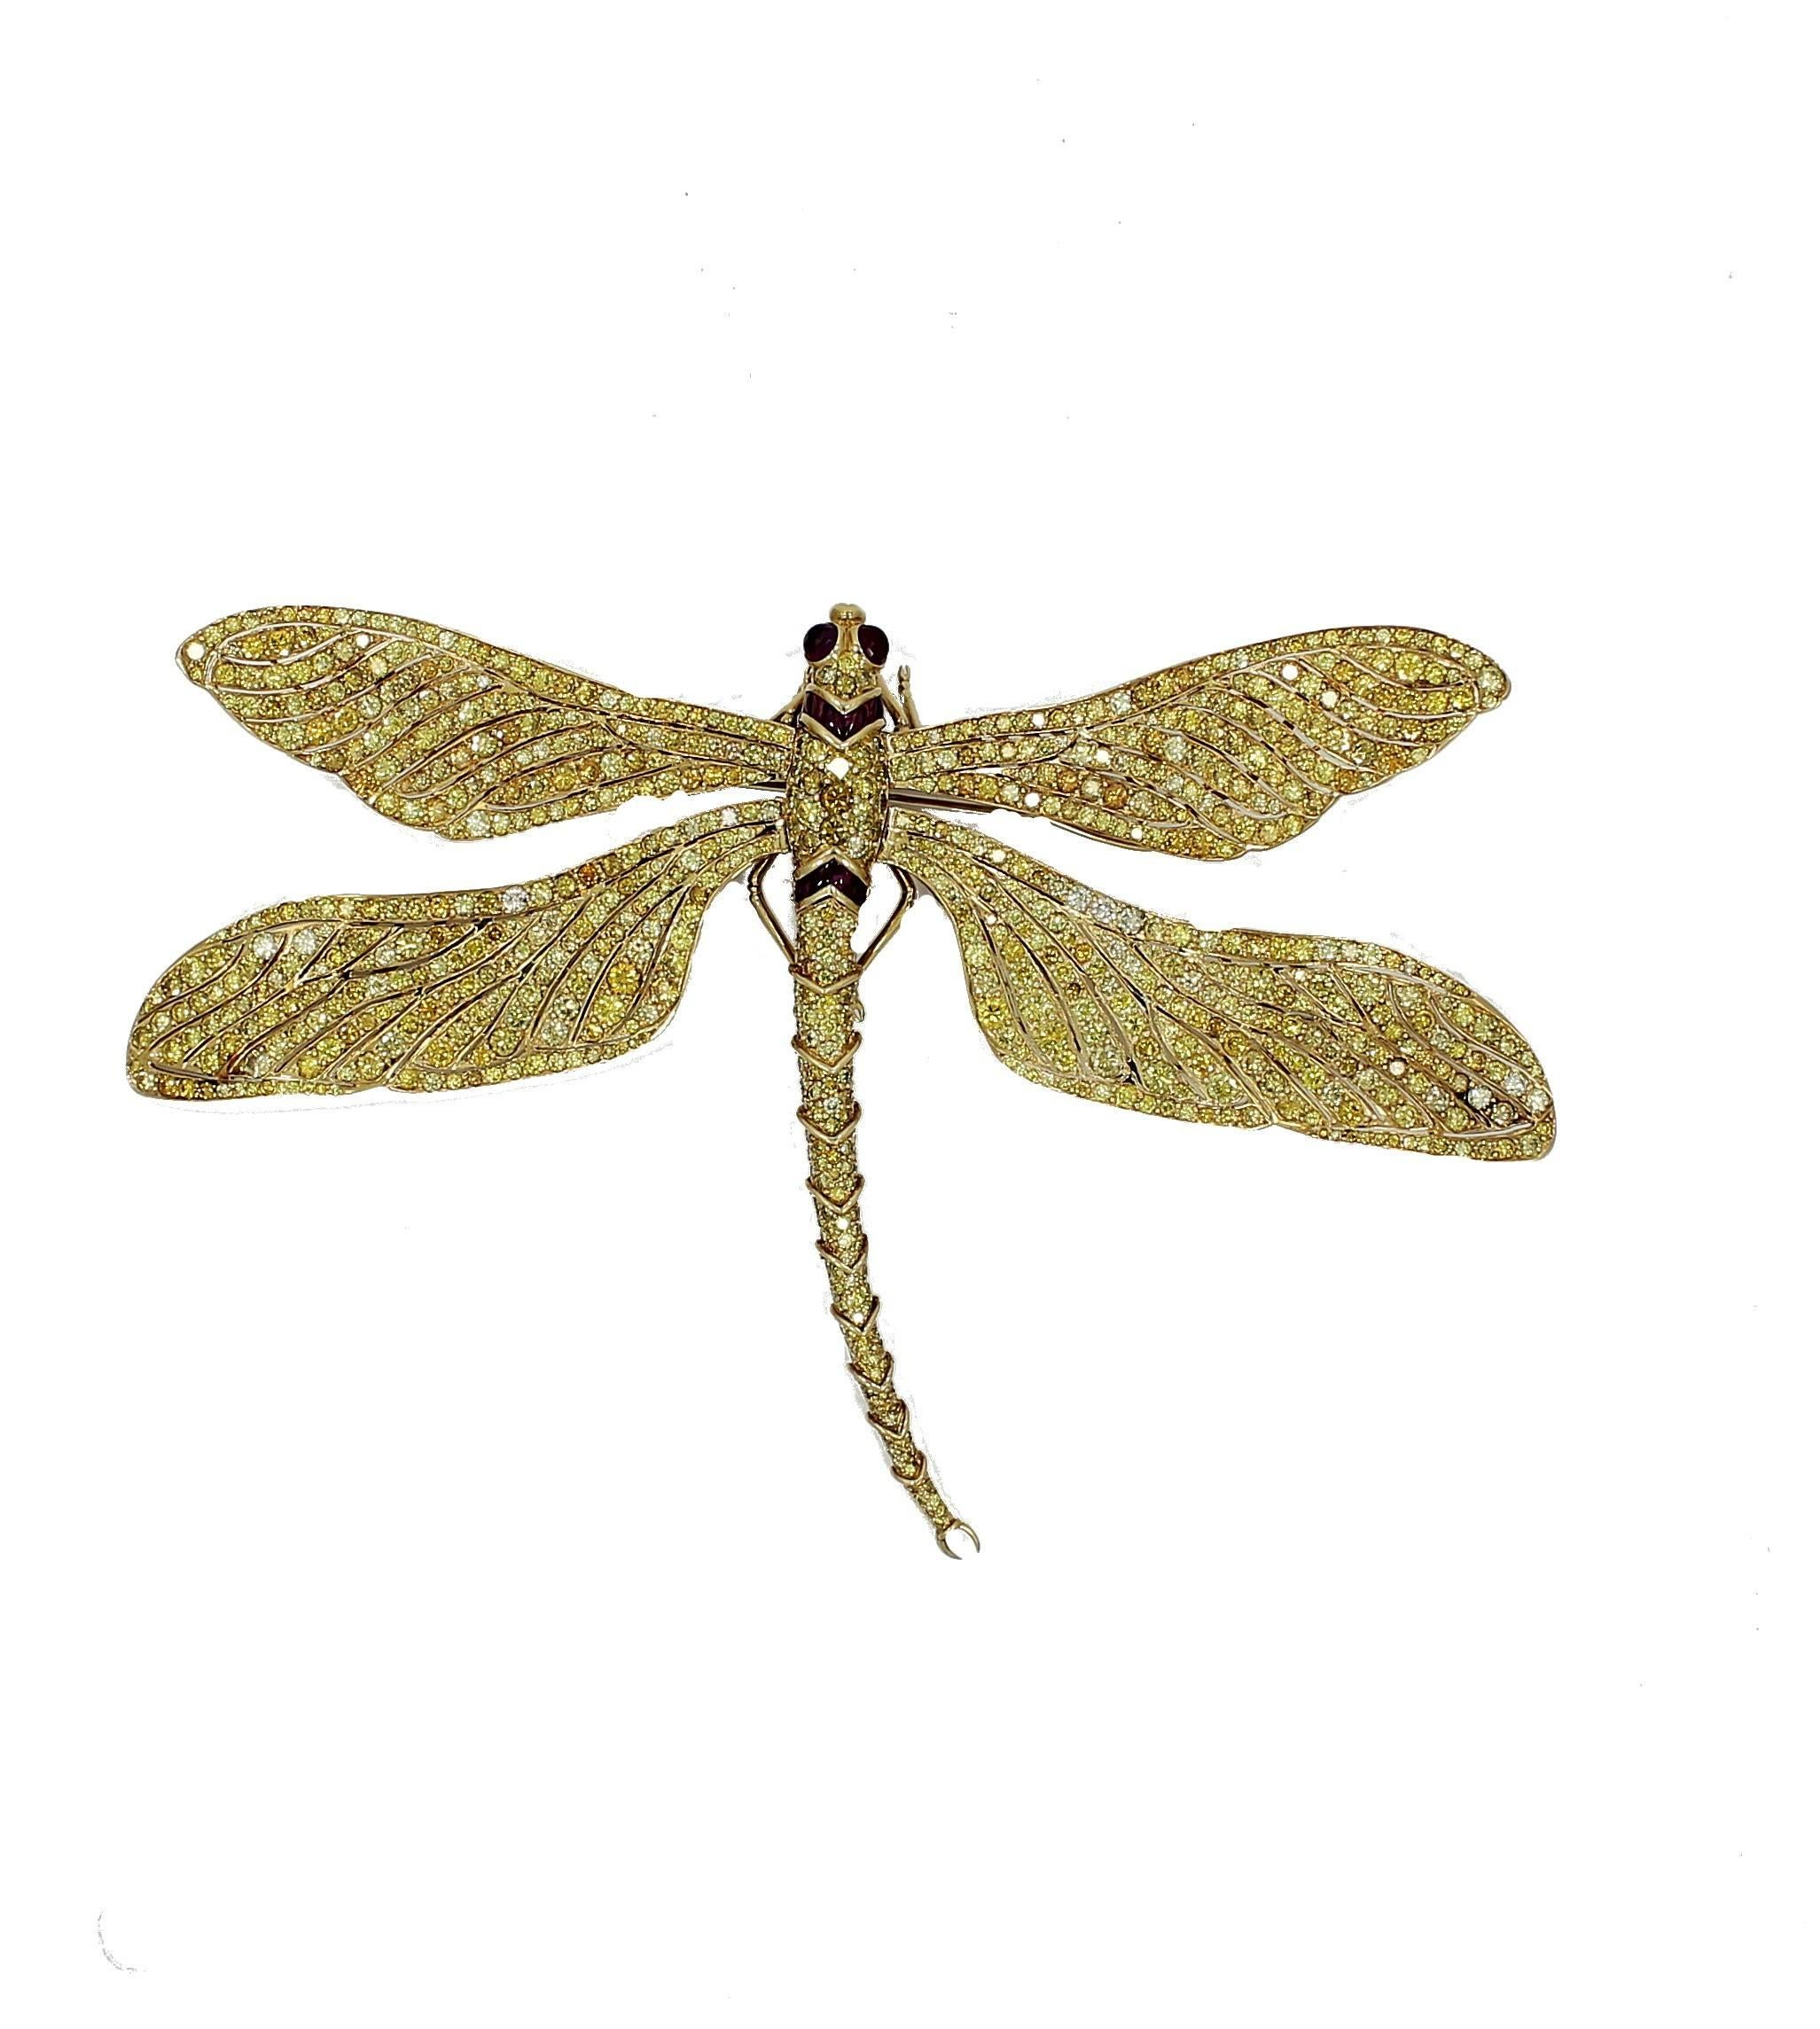 This Pave-set yellow diamond and yellow gold dragonfly brooch by Fred Leighton also features baguette-cut rubies at two cross points on the body and bulging ruby eyes. This Brooch has approximately 54.00 carats total weight in yellow diamonds. The